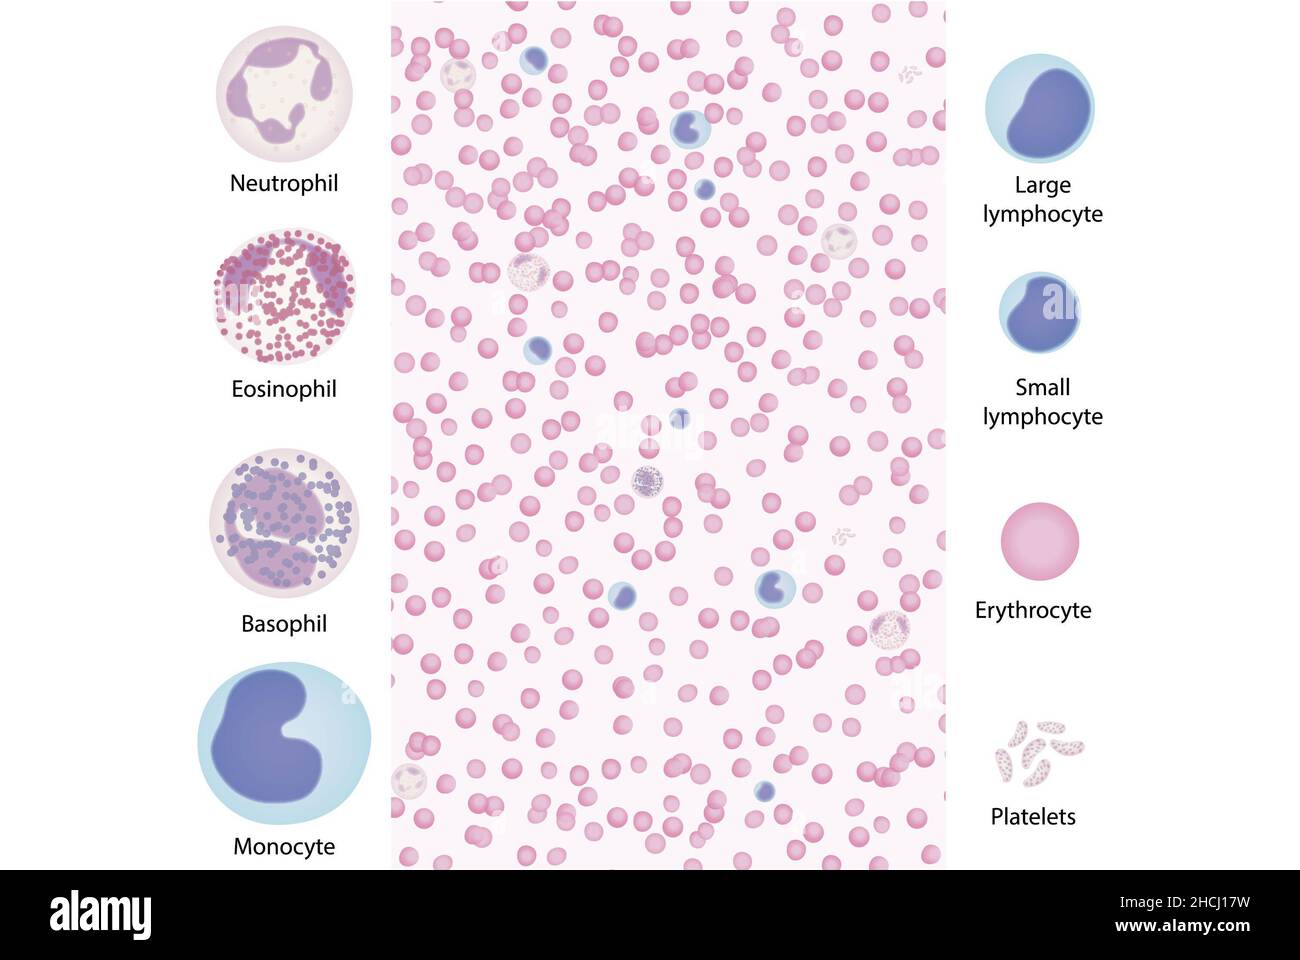 Illustration of the blood smear showing most all of the cells, including basophills. Stock Photo